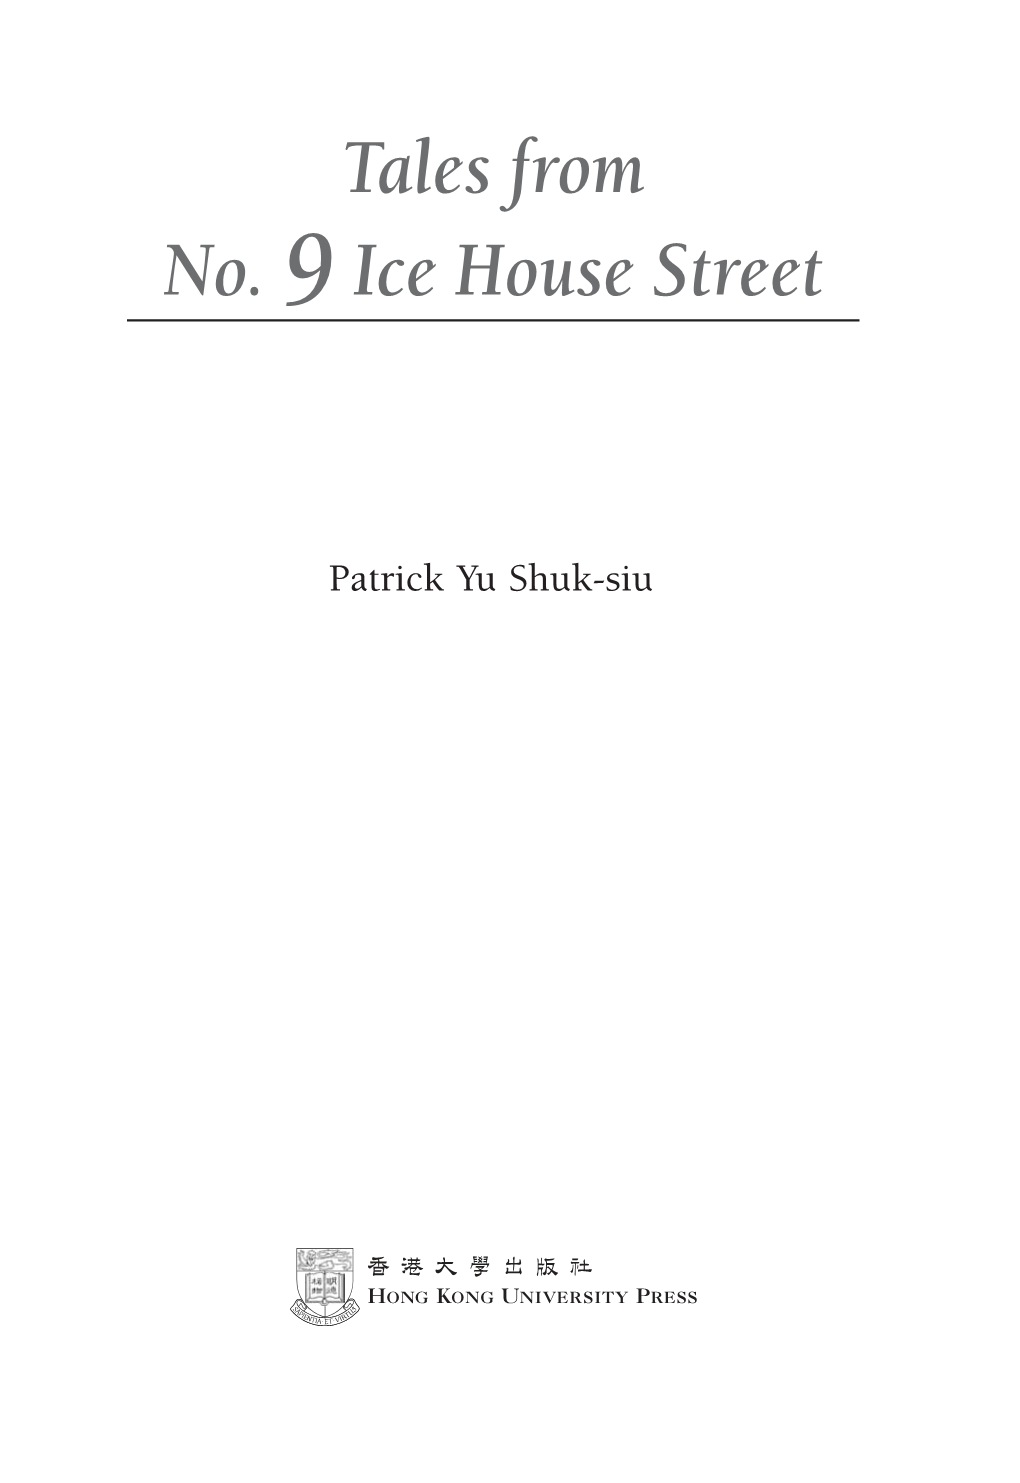 Tales from No. 9 Ice House Street